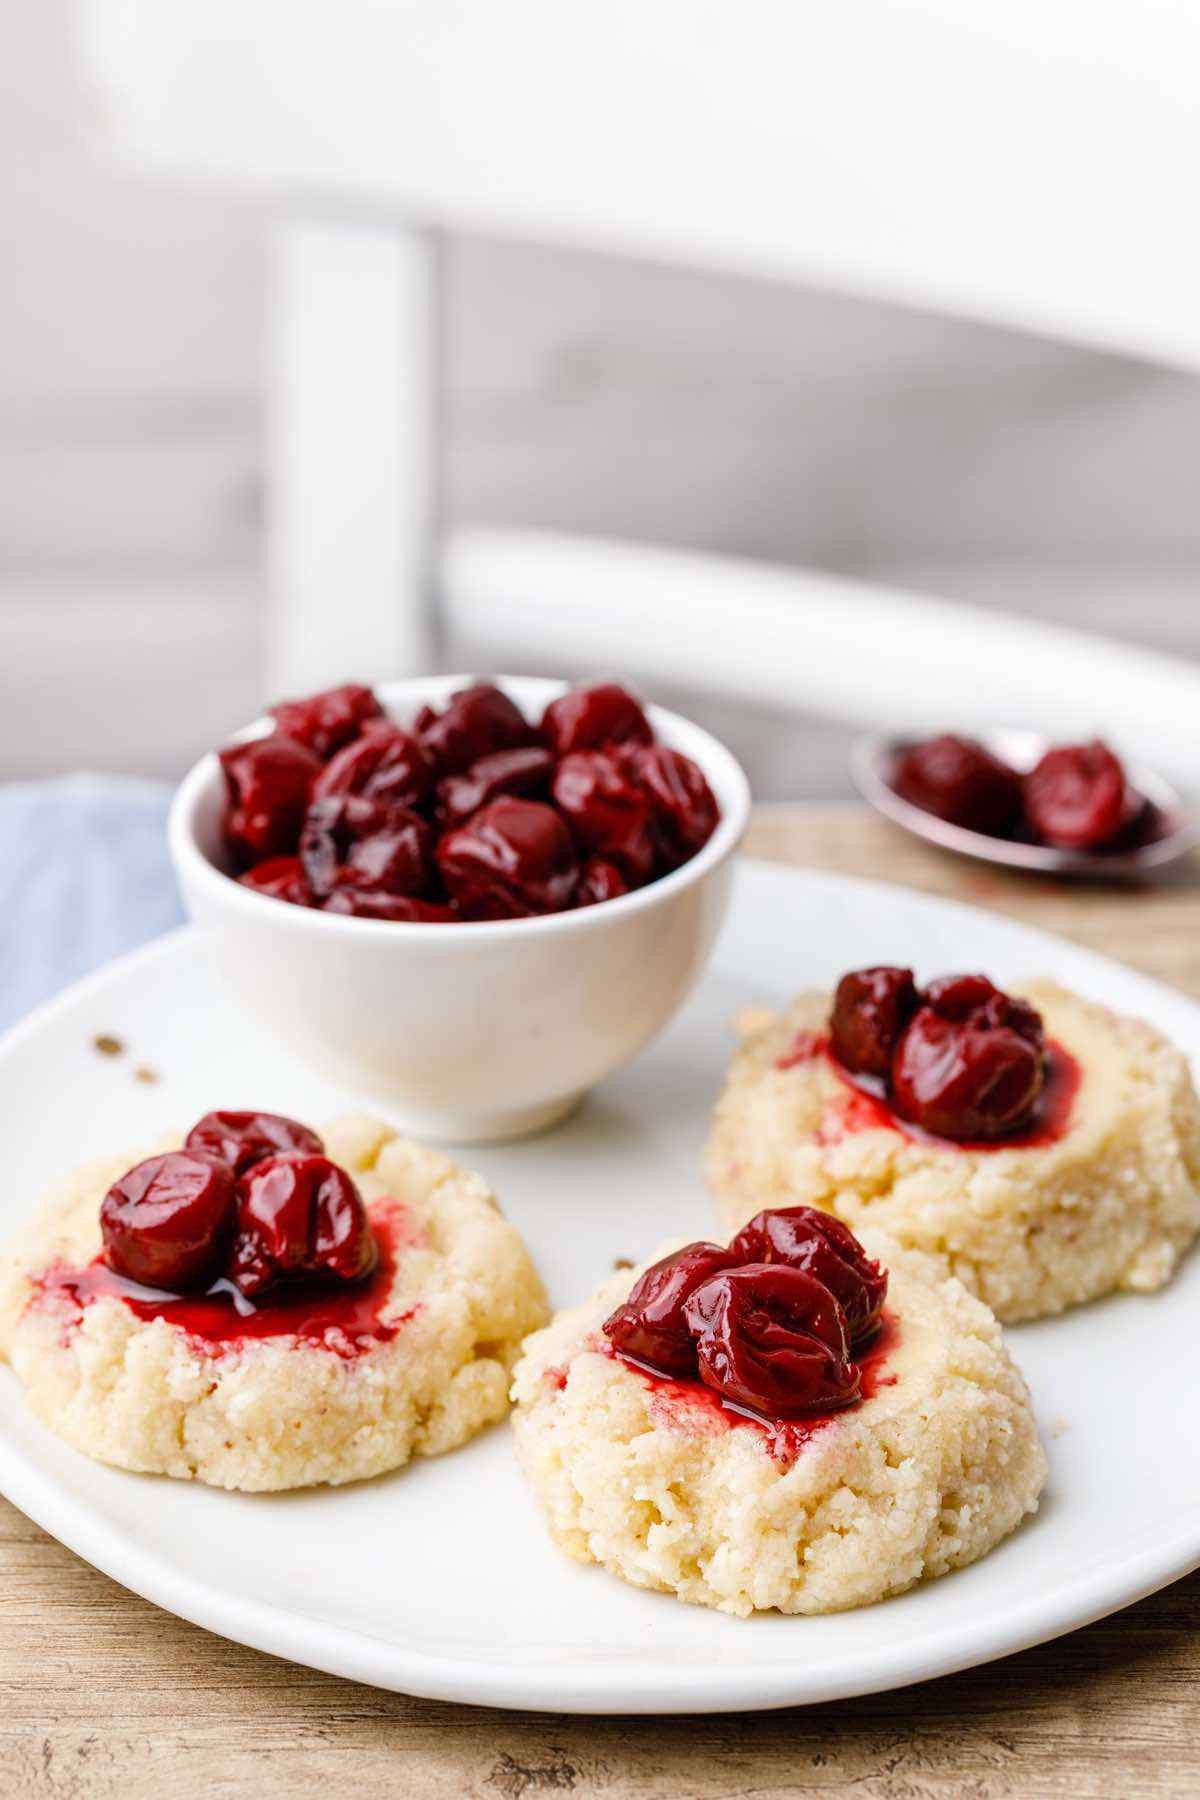 Low Carb Keto Cream Cheese Cookies
 Low Carb Keto Cream Cheese Cookies with Cherry Glaze